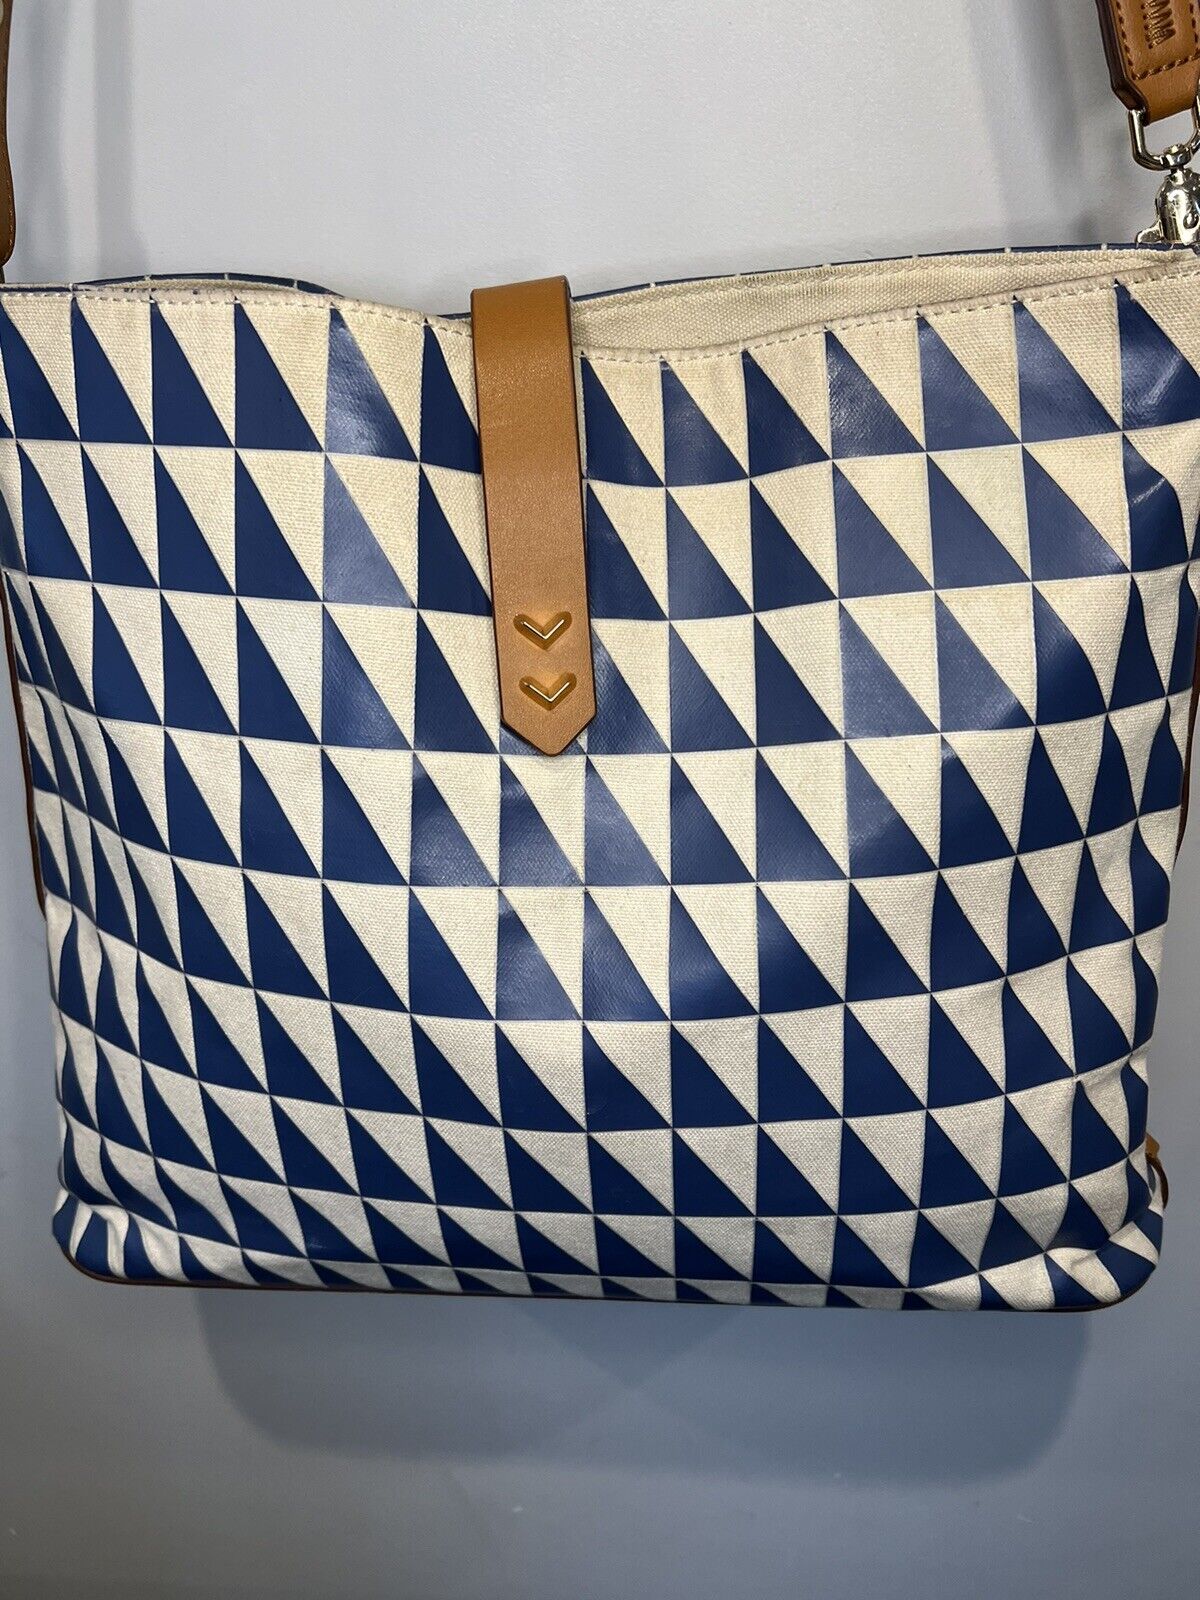 Stella & Dot Canvas Tote Bag Blue And White Geo T… - image 4